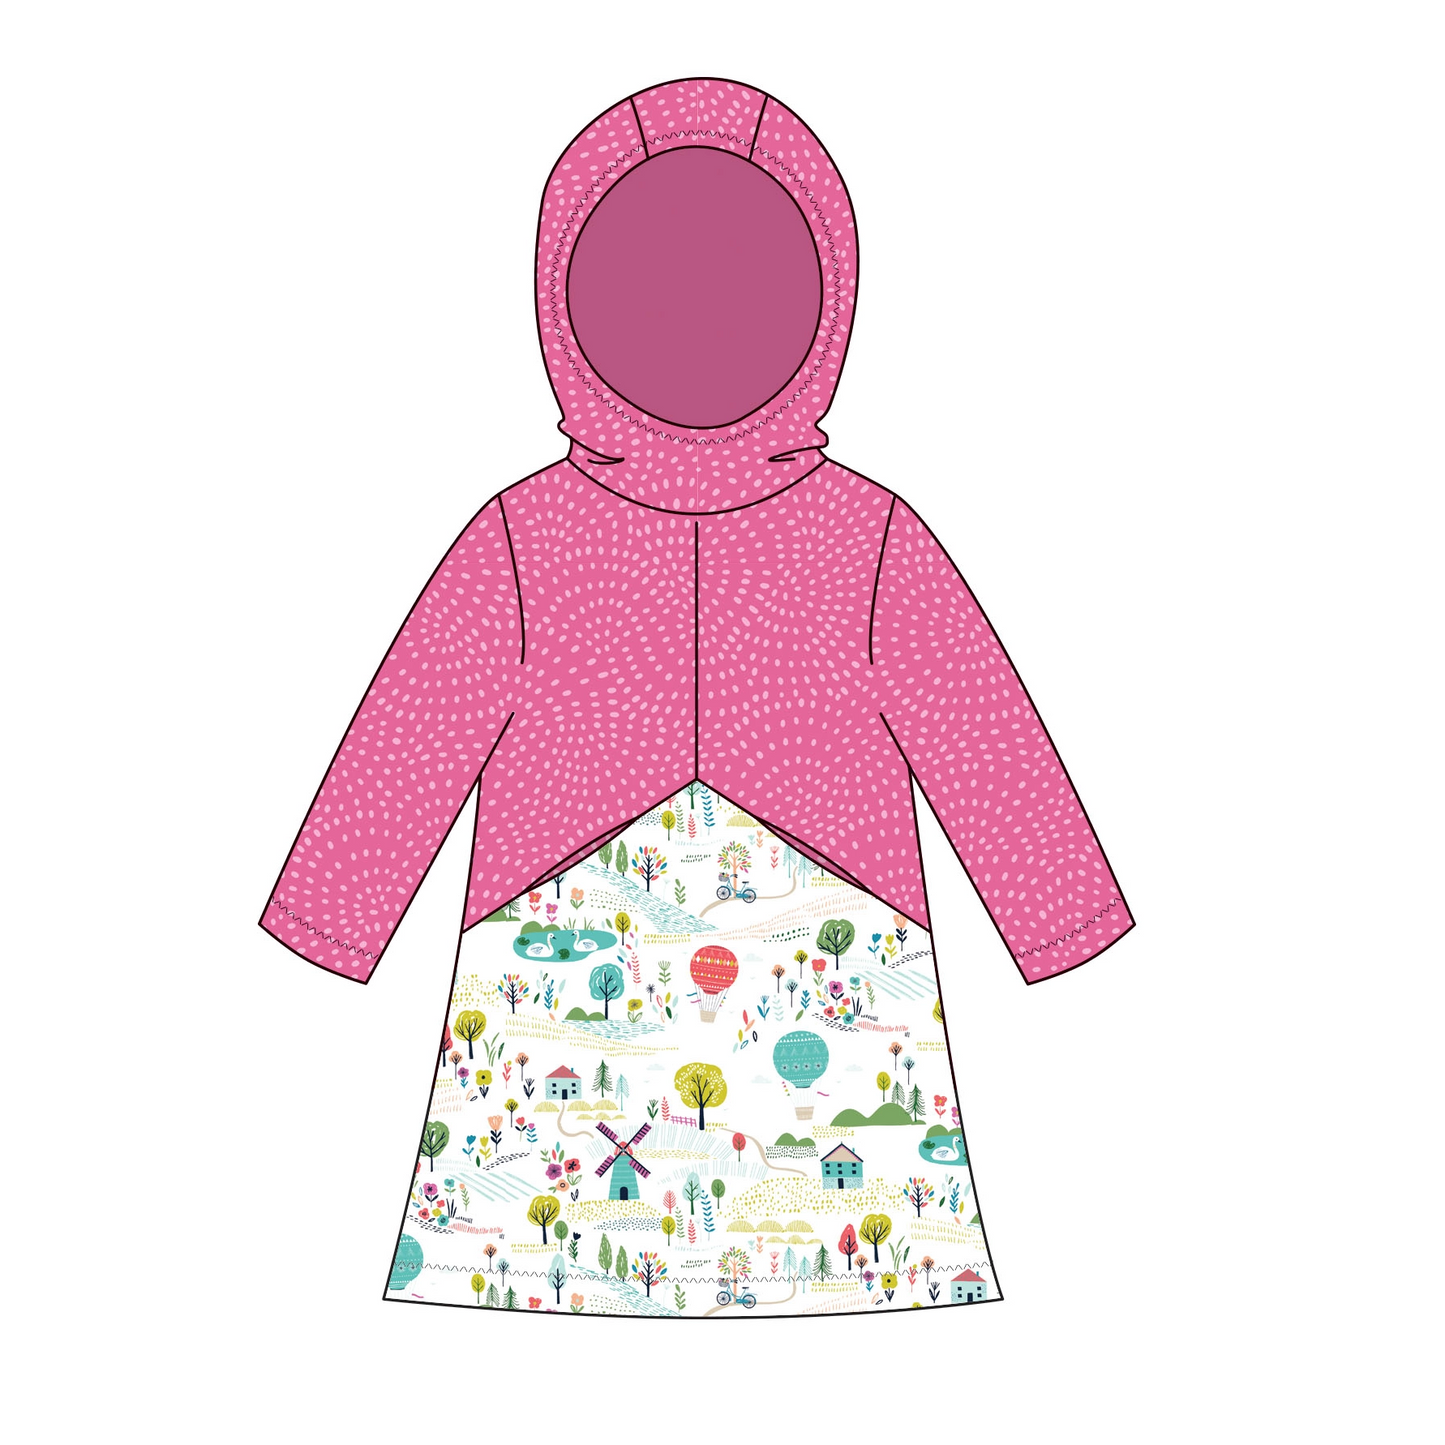 DAMAGED PACKAGE Charlie Hoodie & Tunic Sewing Pattern for Childrenswear (UK Indie Pattern)